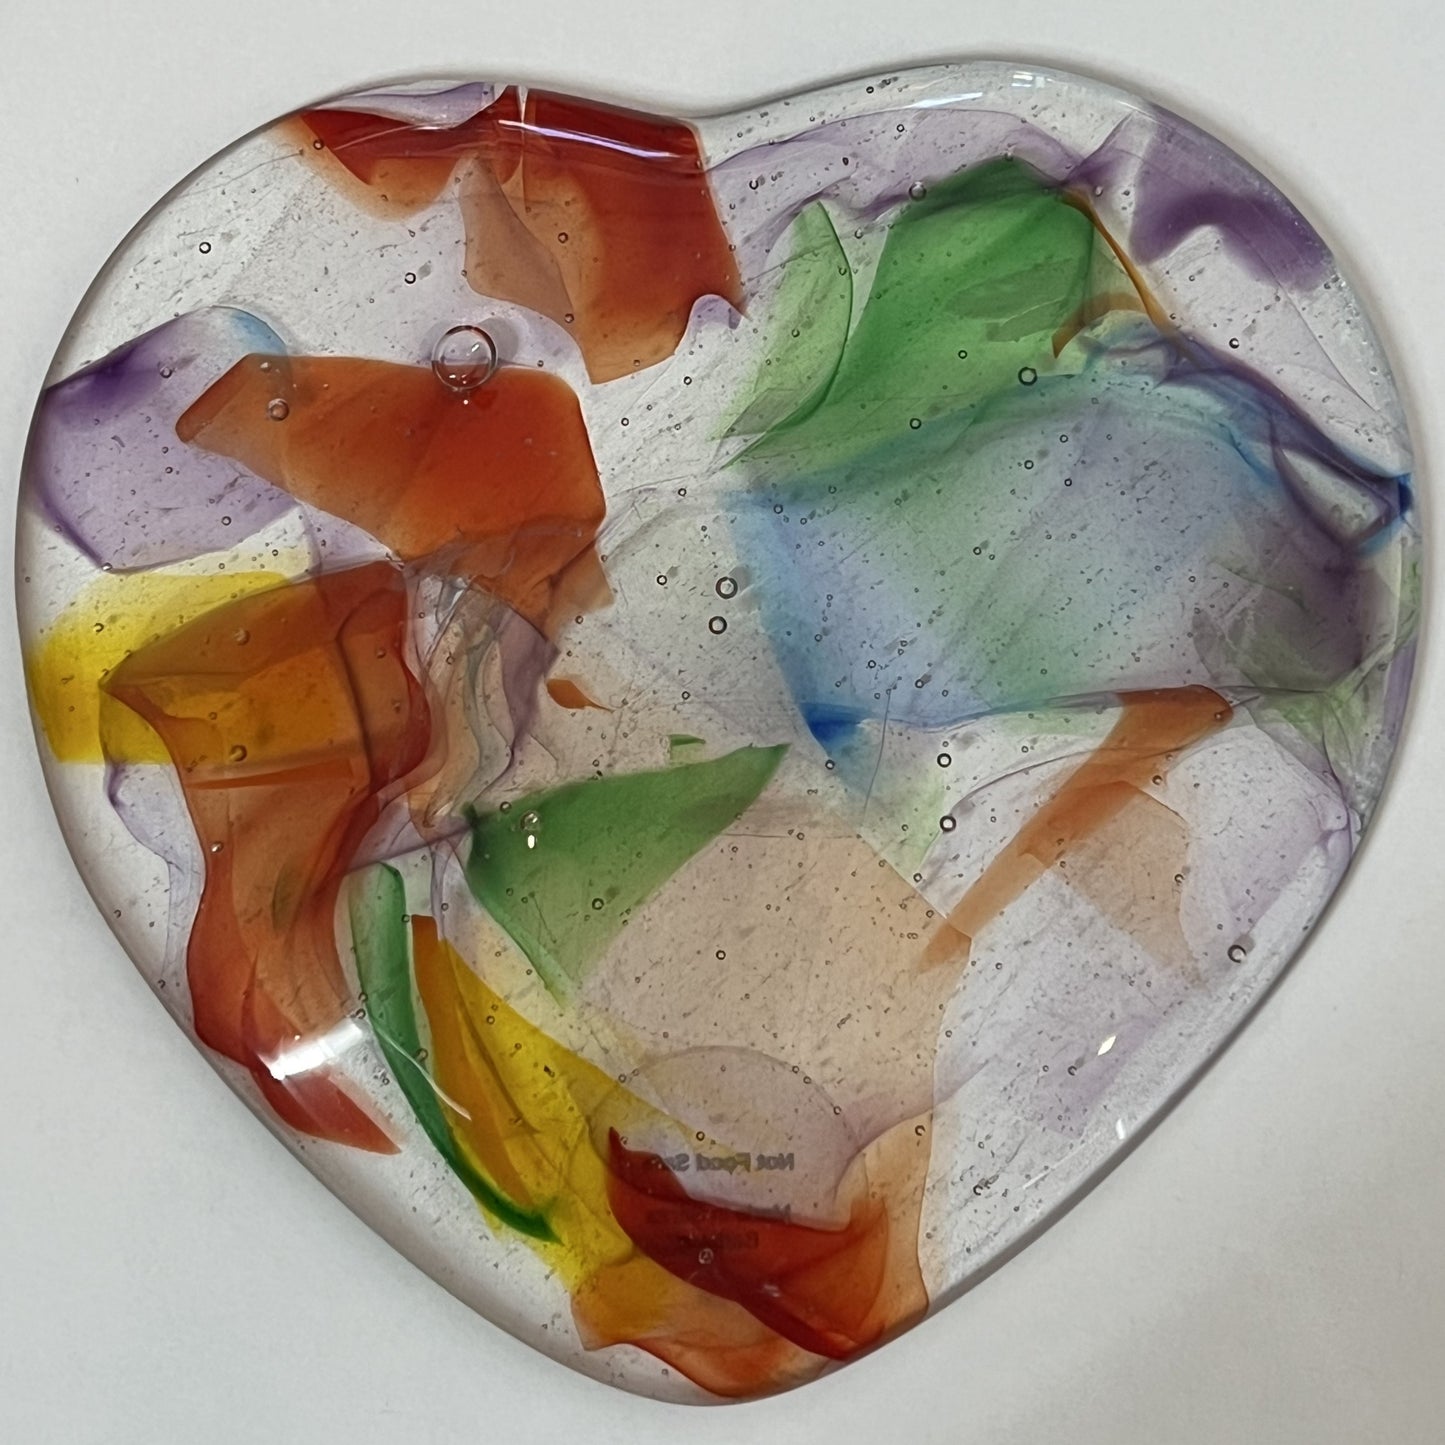 Glass Heart - Multicolor Translucent - Style 2